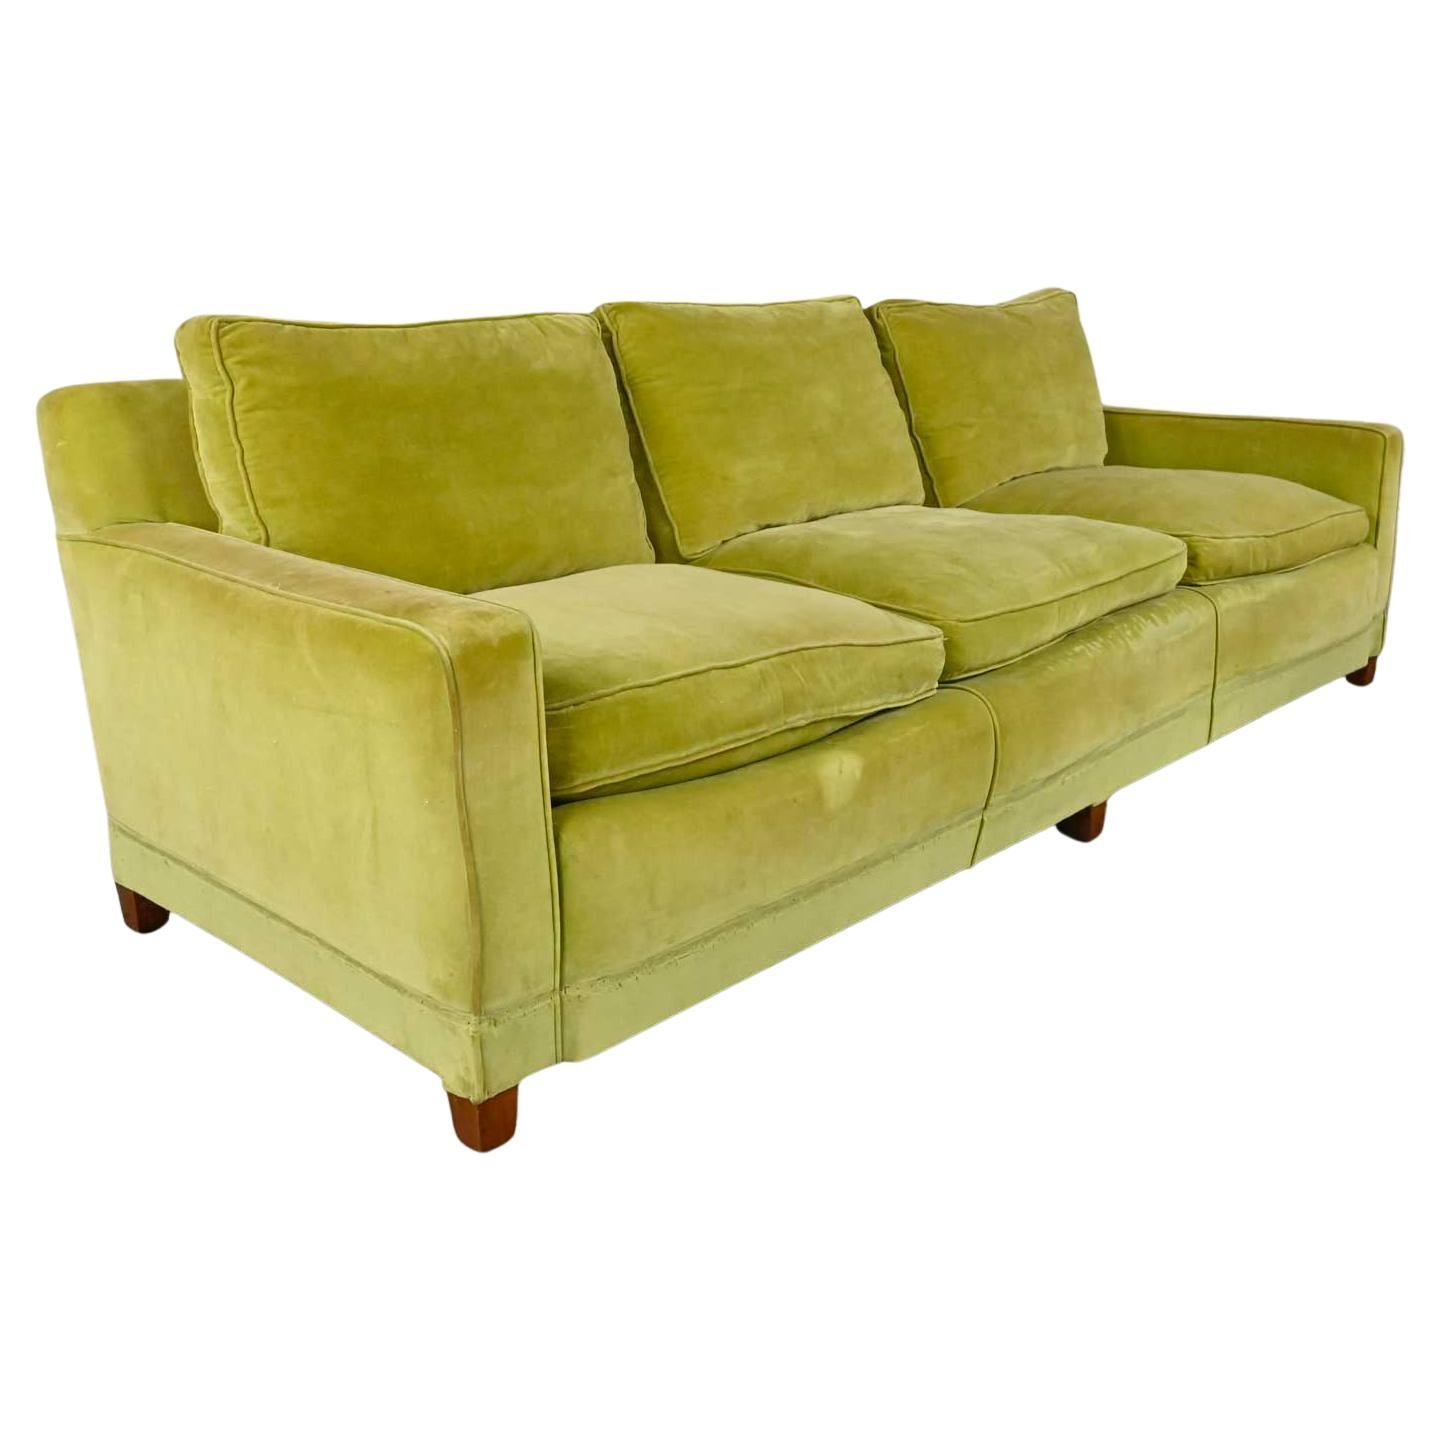 Vint Mid-Century Modern Feather Lawson Style Sofa Frame Only Needs Upholstered